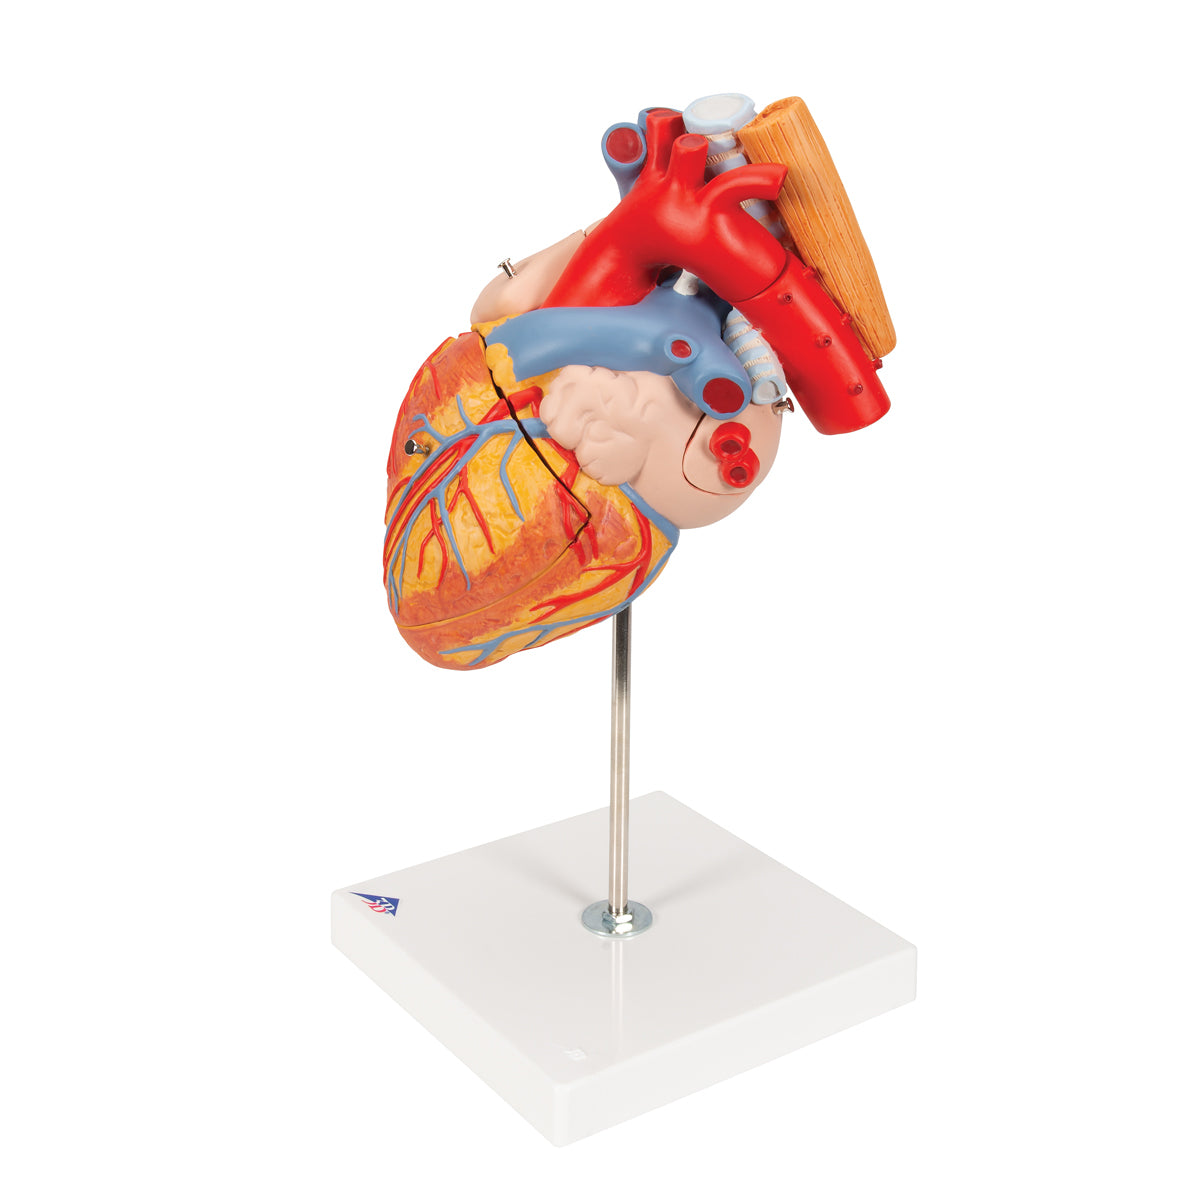 Enlarged and hand-painted heart model with trachea and esophagus